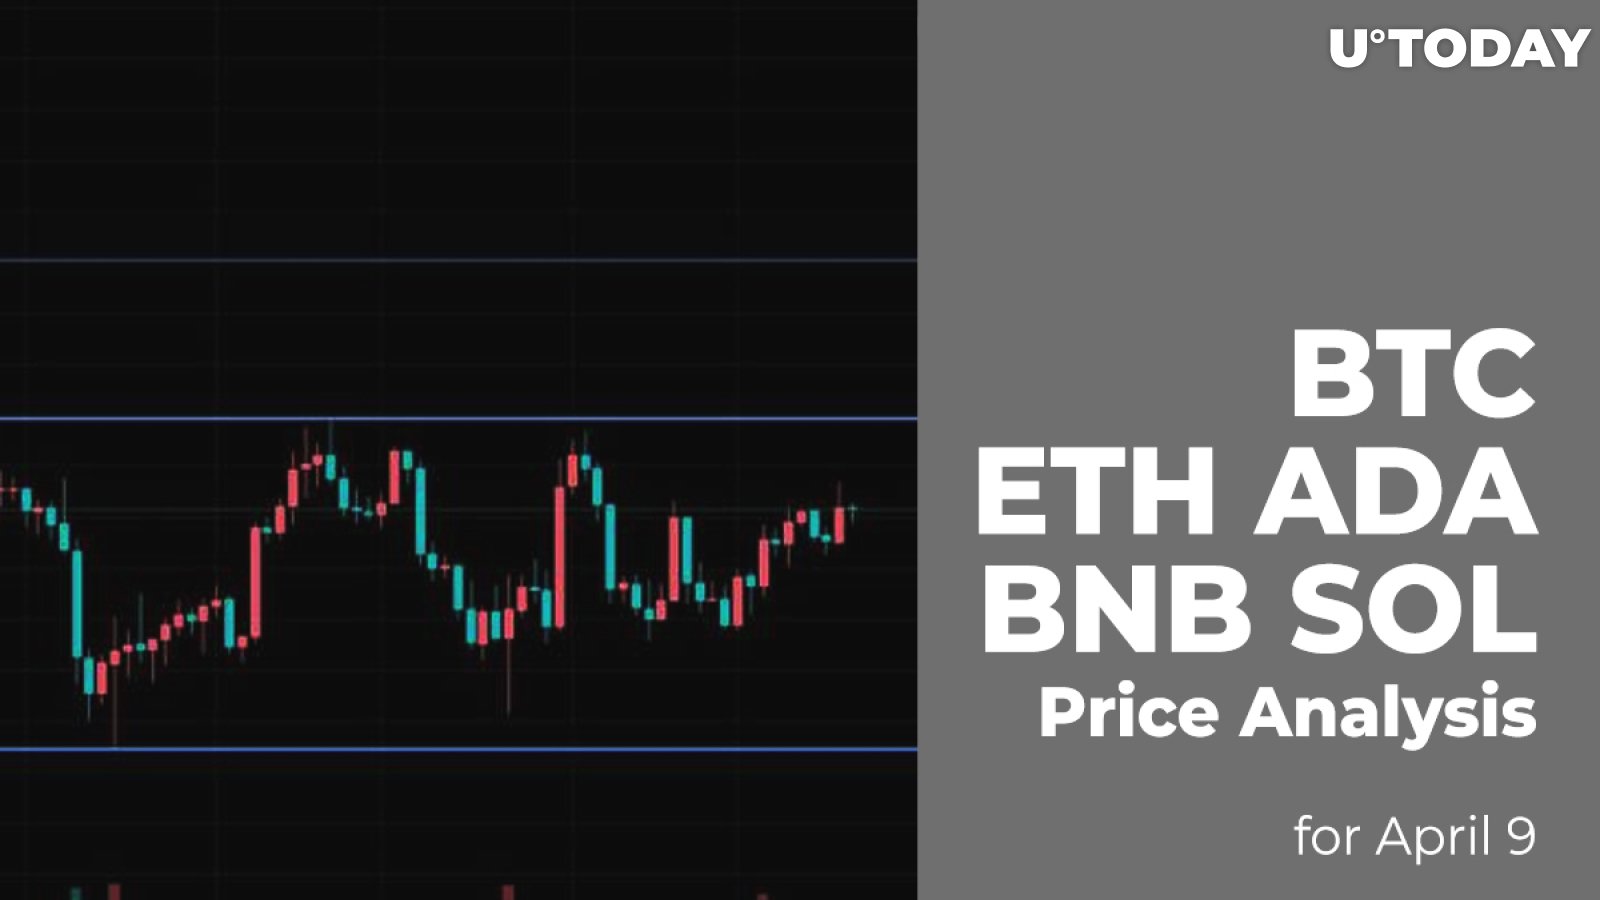 BTC, ETH, ADA, BNB and SOL Price Analysis for April 9